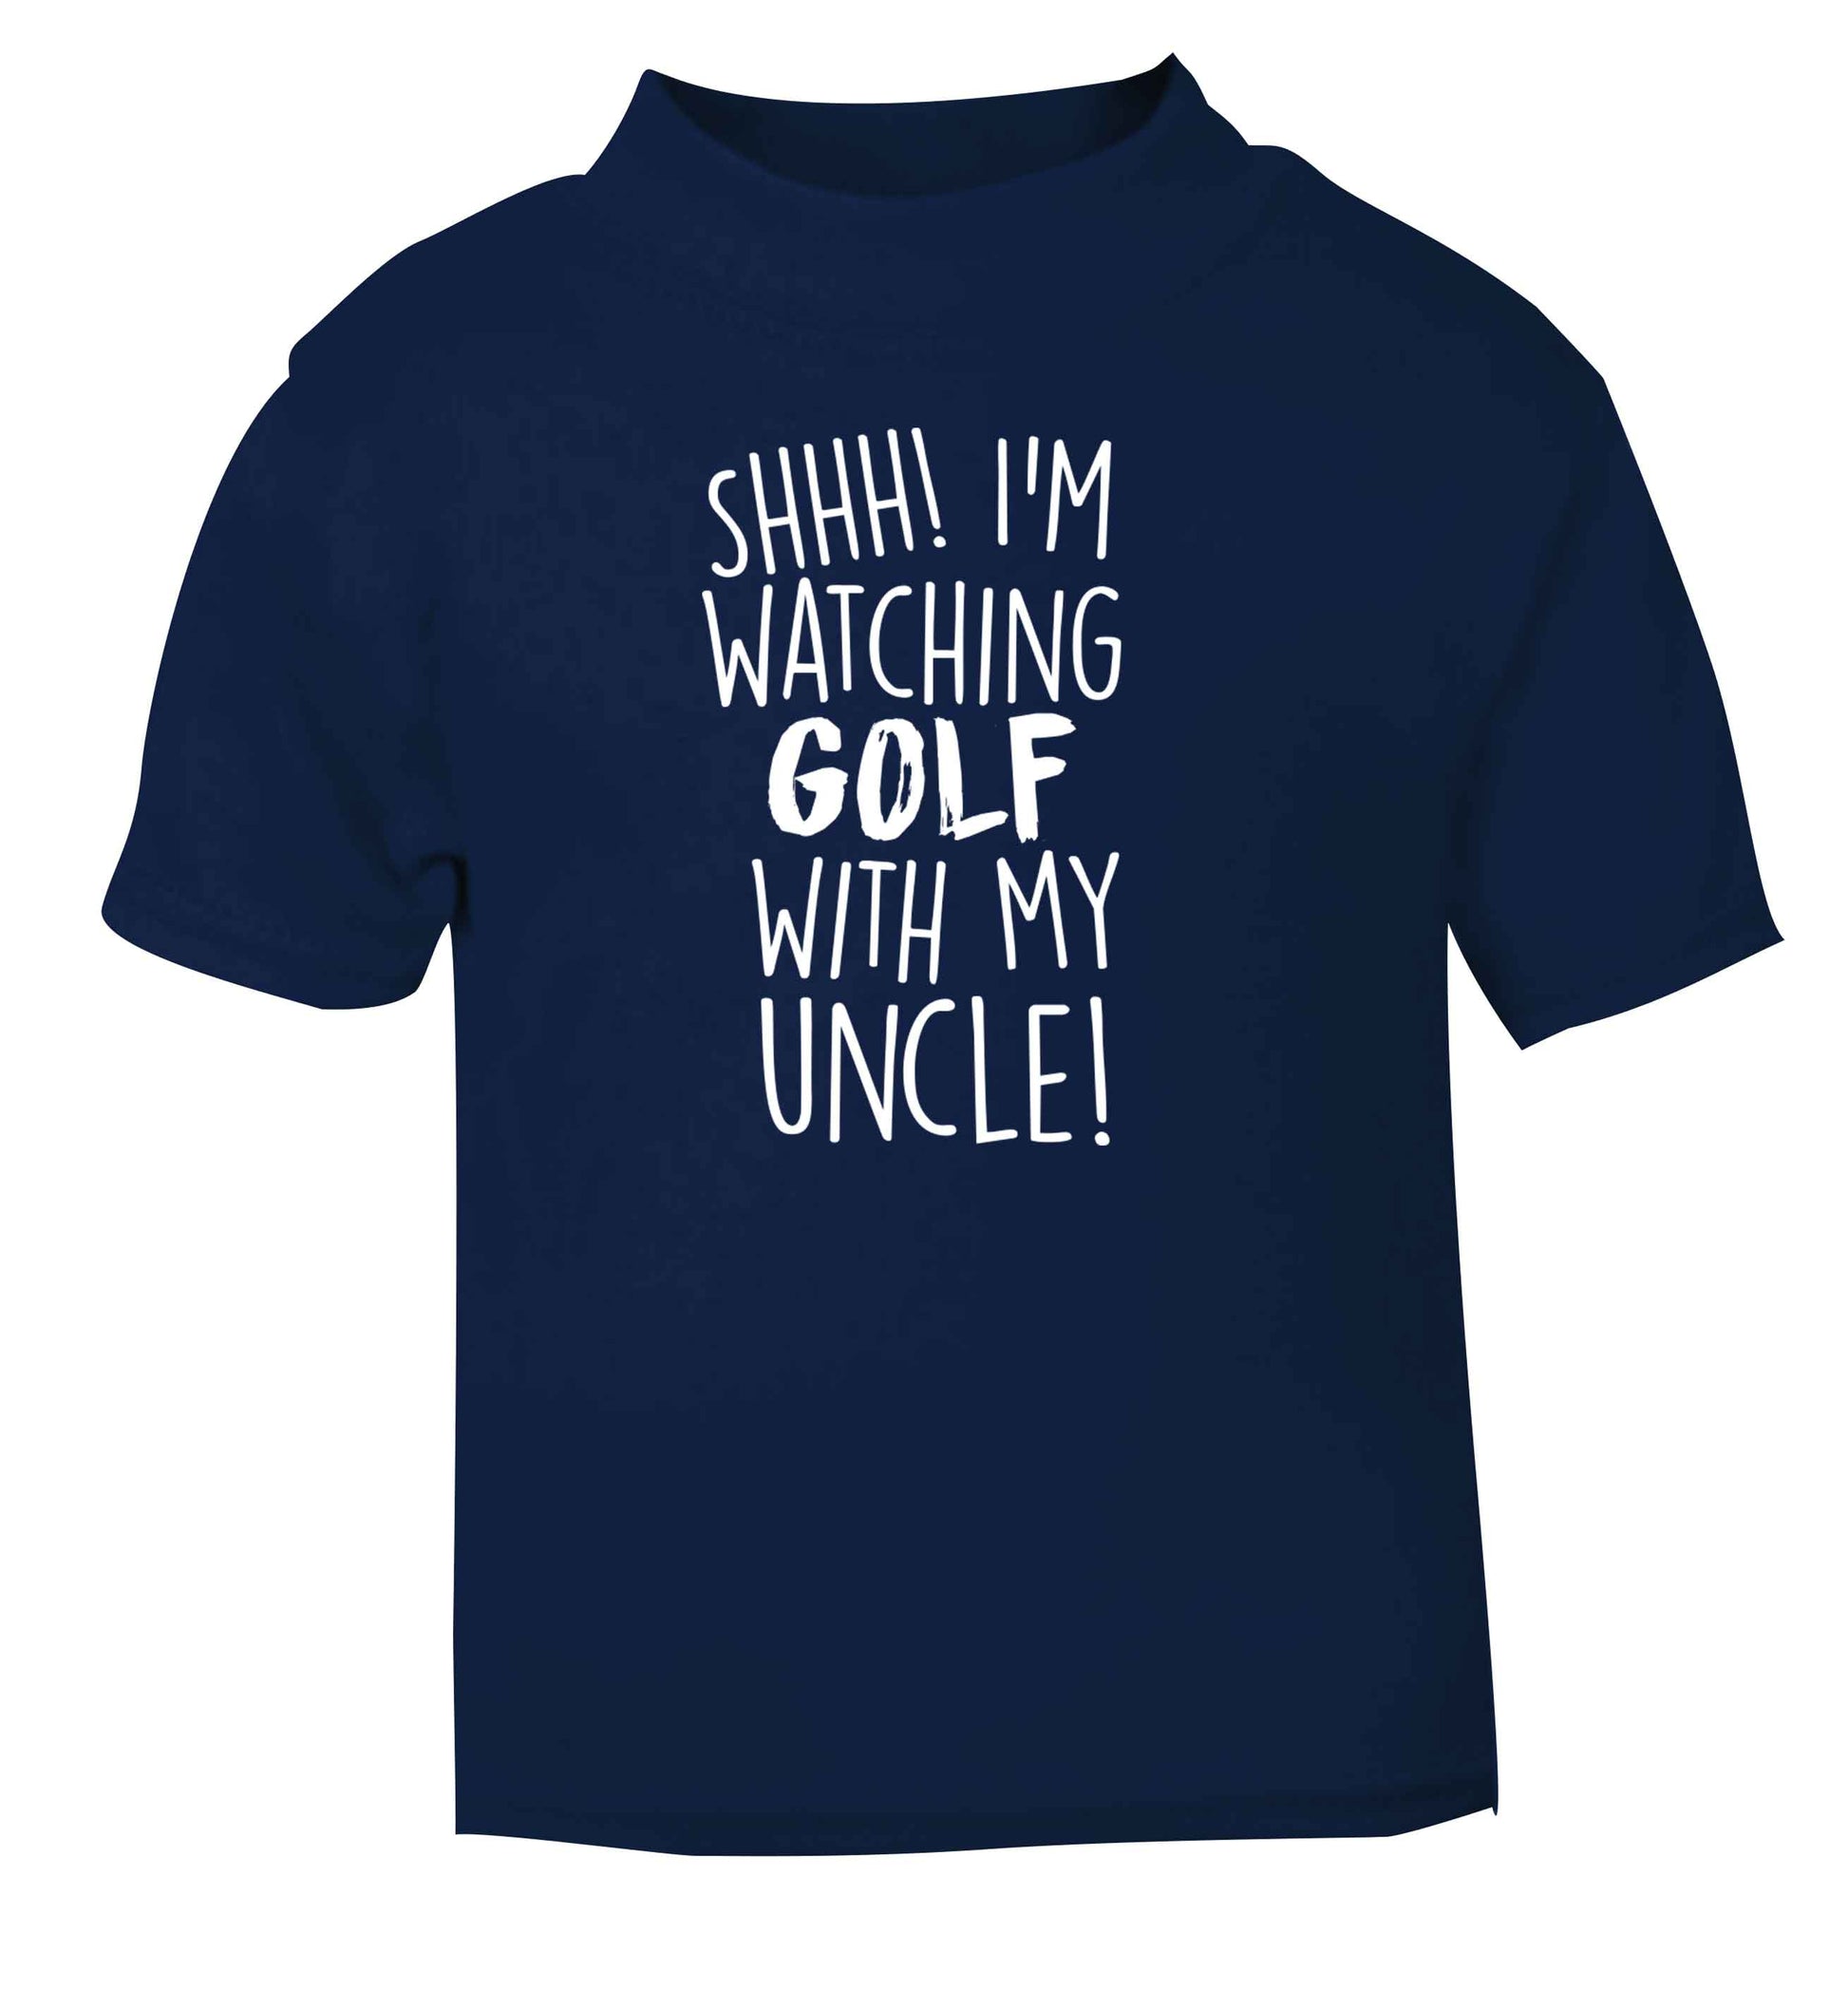 Shh I'm watching golf with my uncle navy Baby Toddler Tshirt 2 Years